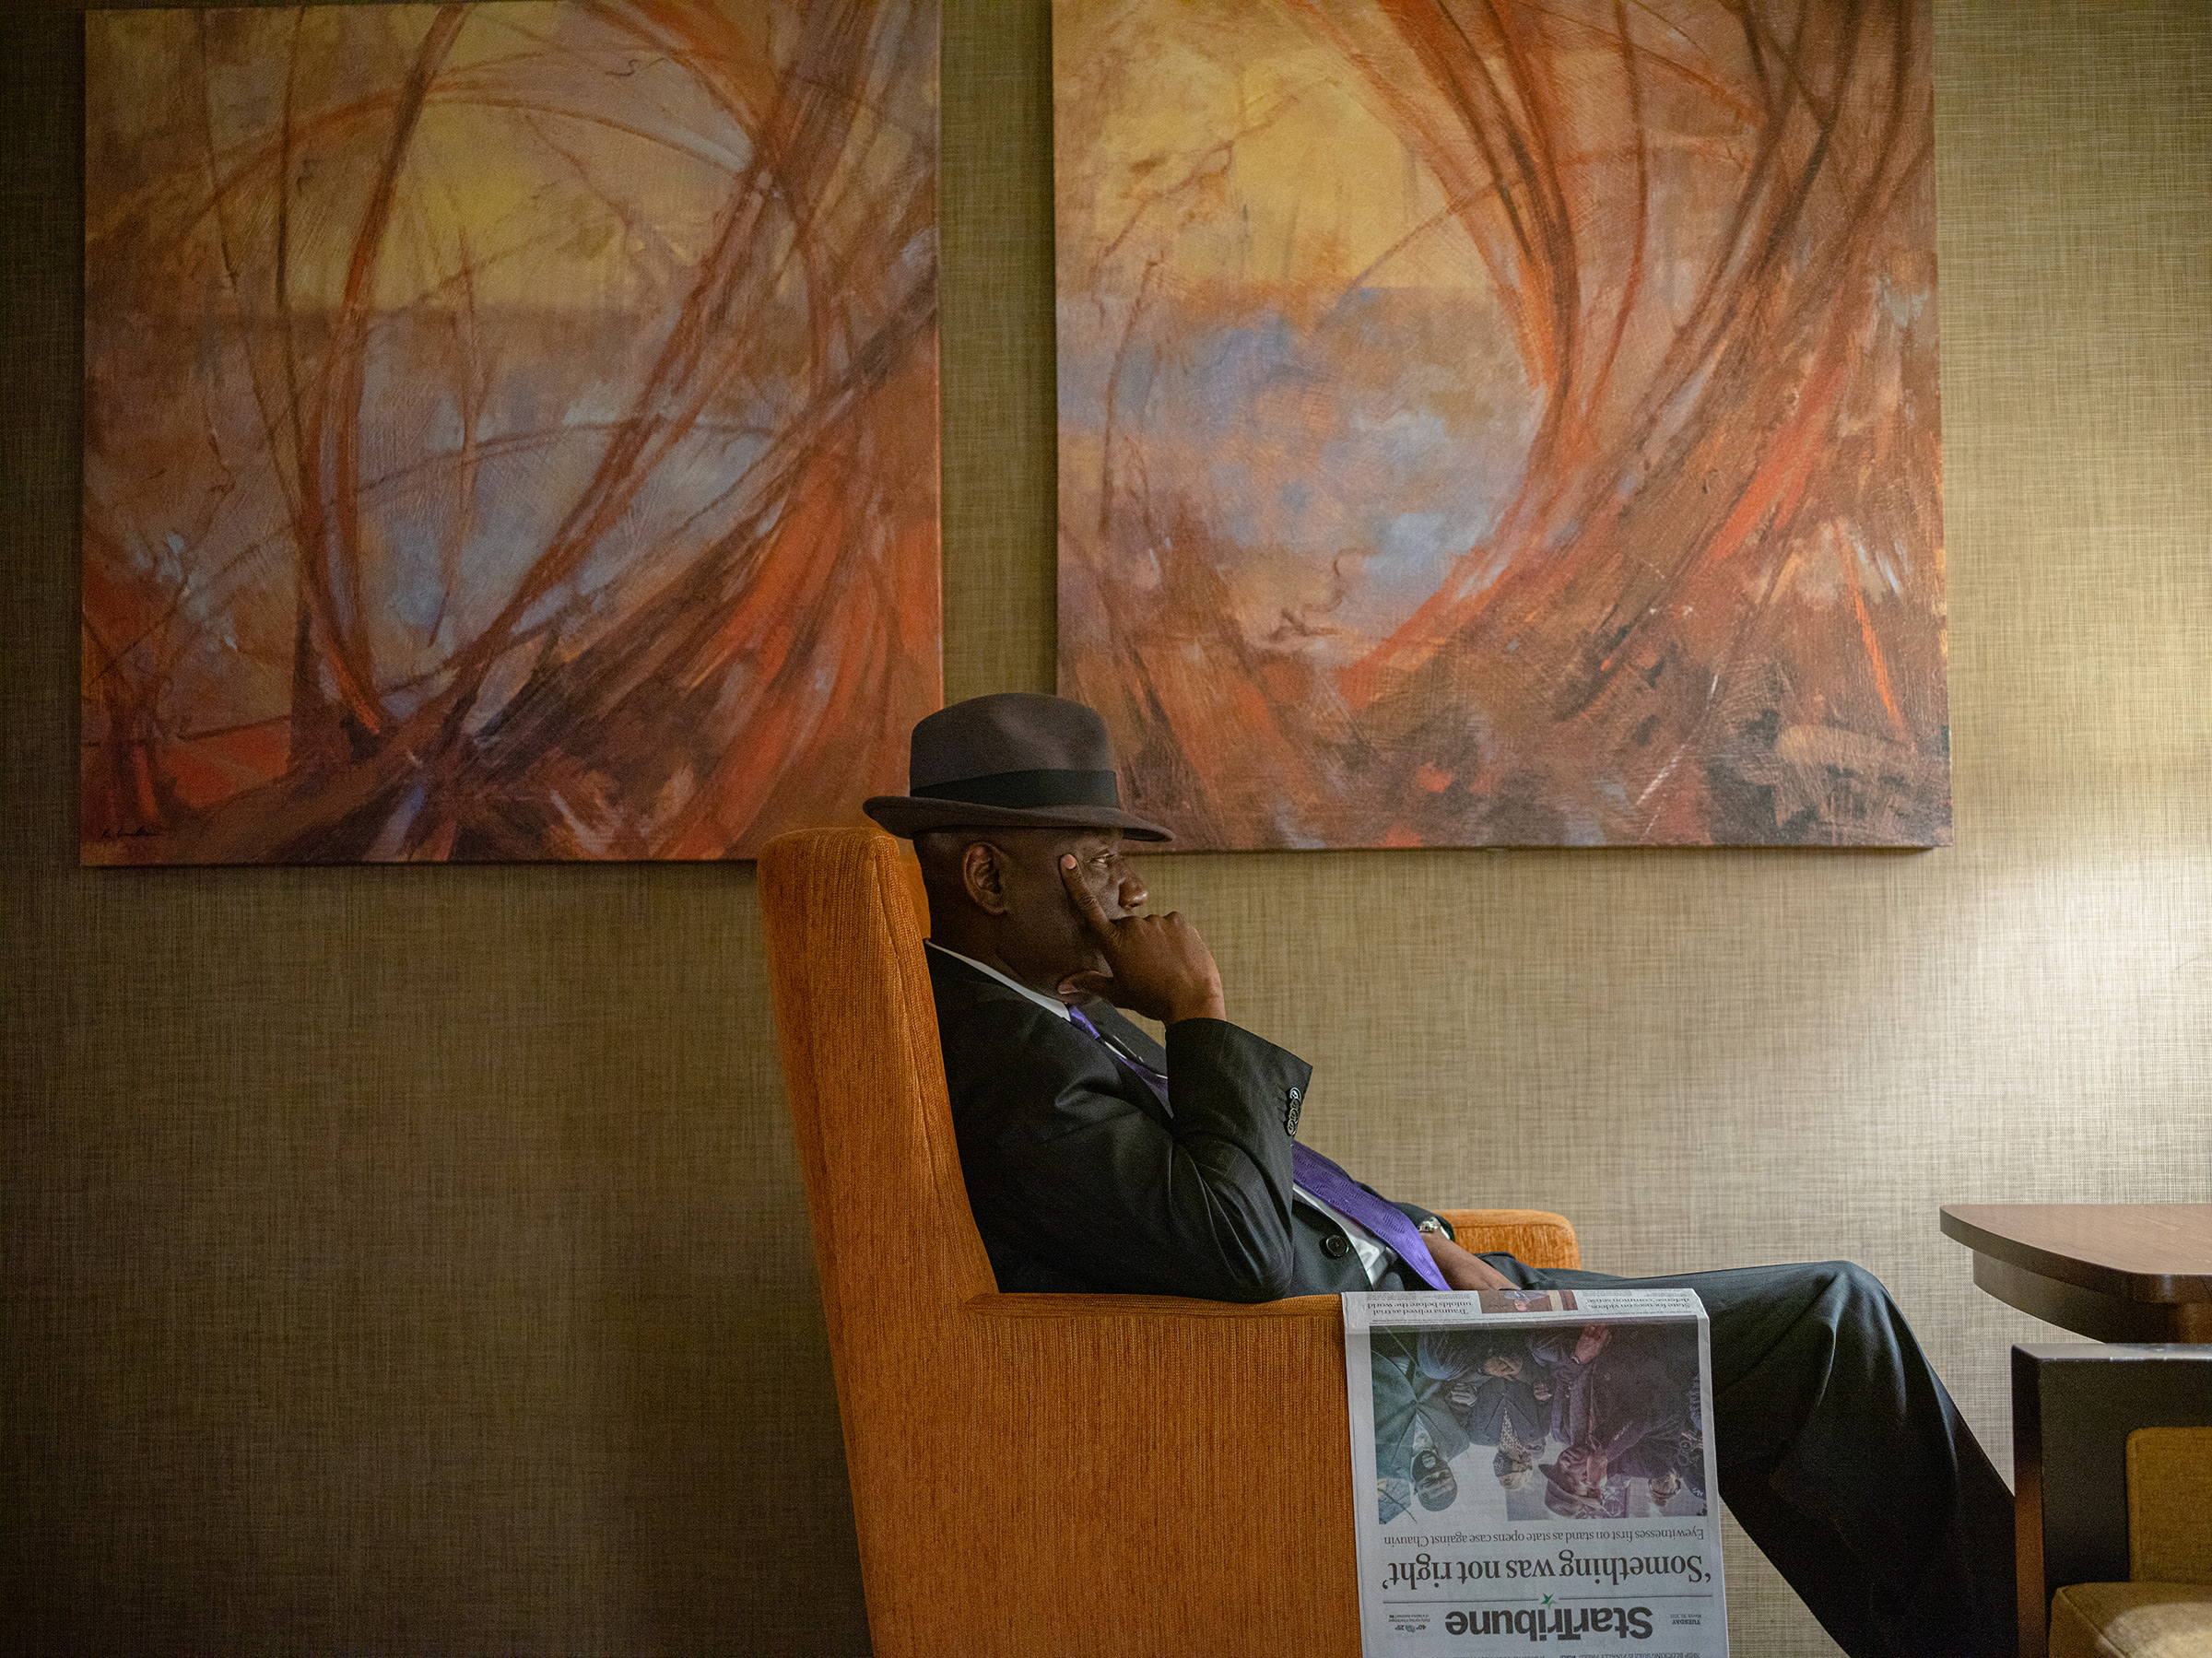 Crump rests after reading the paper in the lobby of the Westin Hotel in Minneapolis on March 30. (Ruddy Roye for TIME)